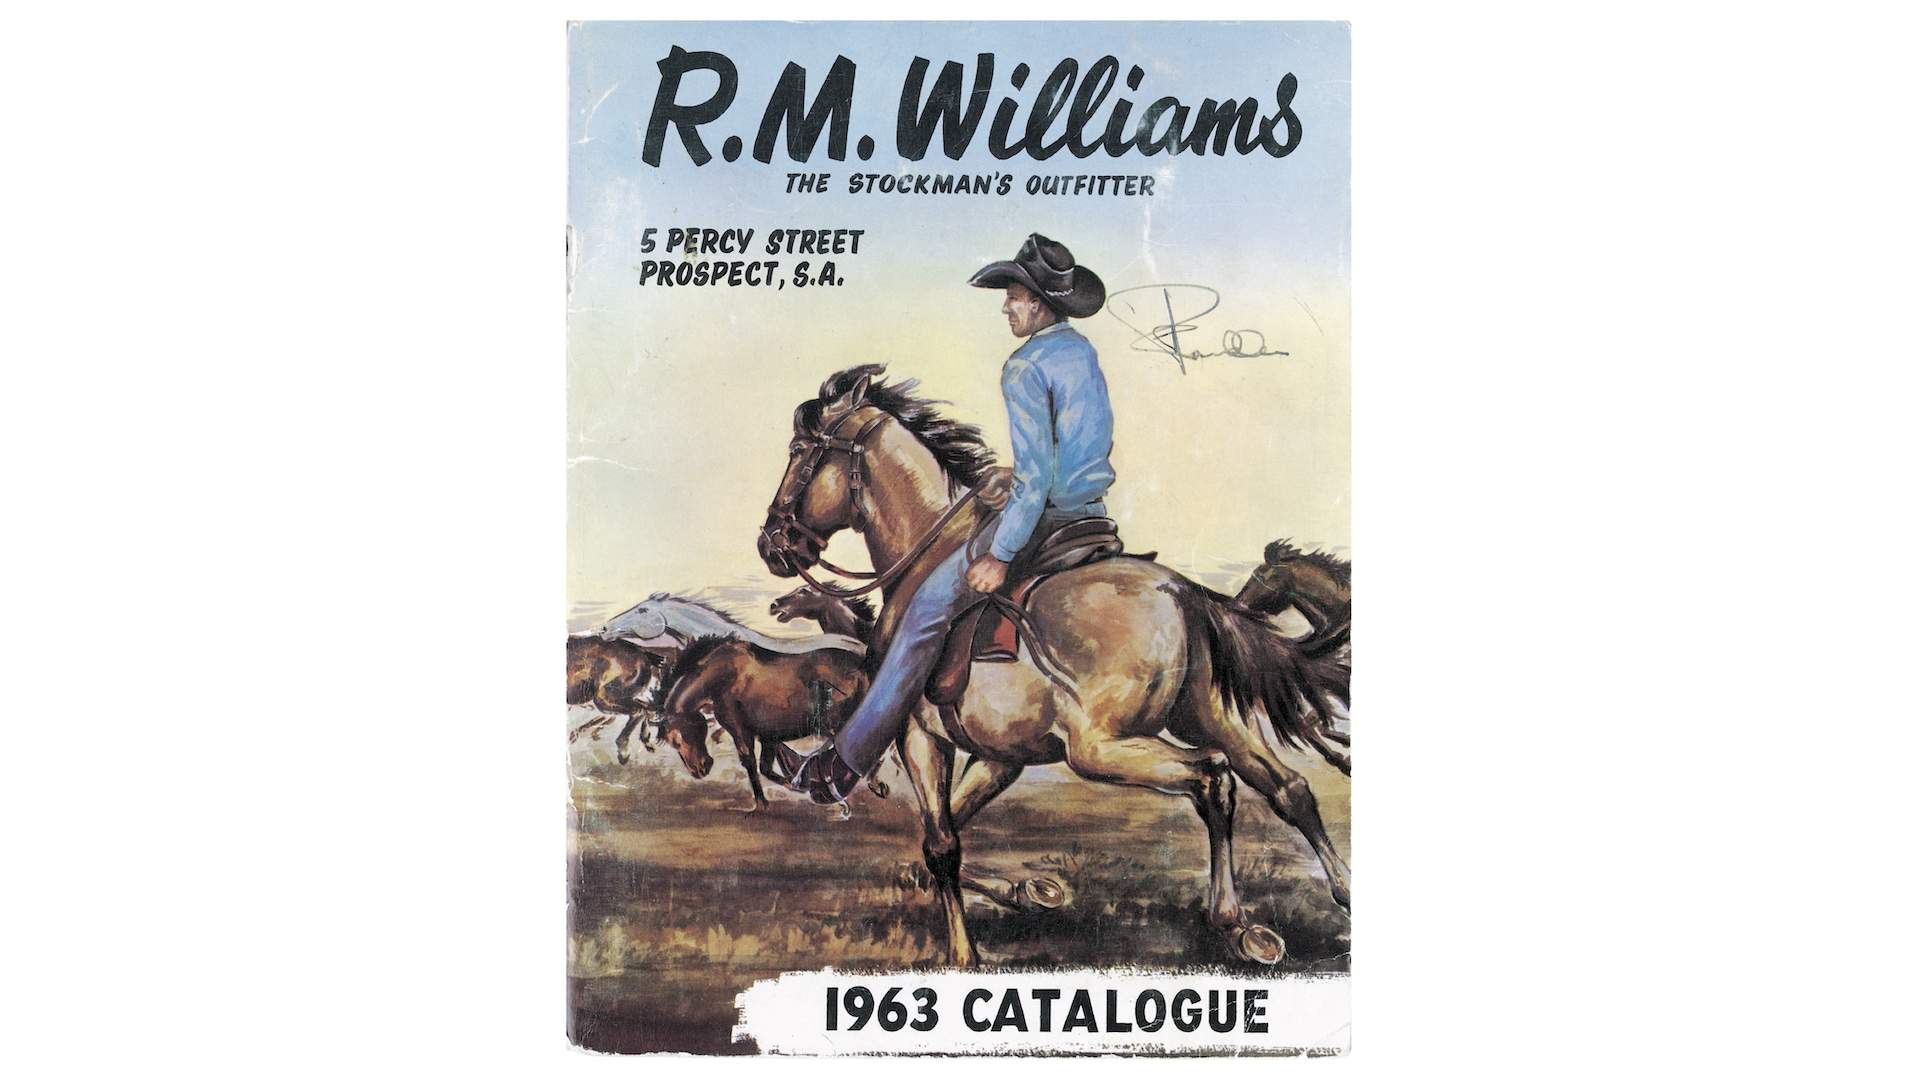 Why R.M. Williams expanded its women's range - Ragtrader